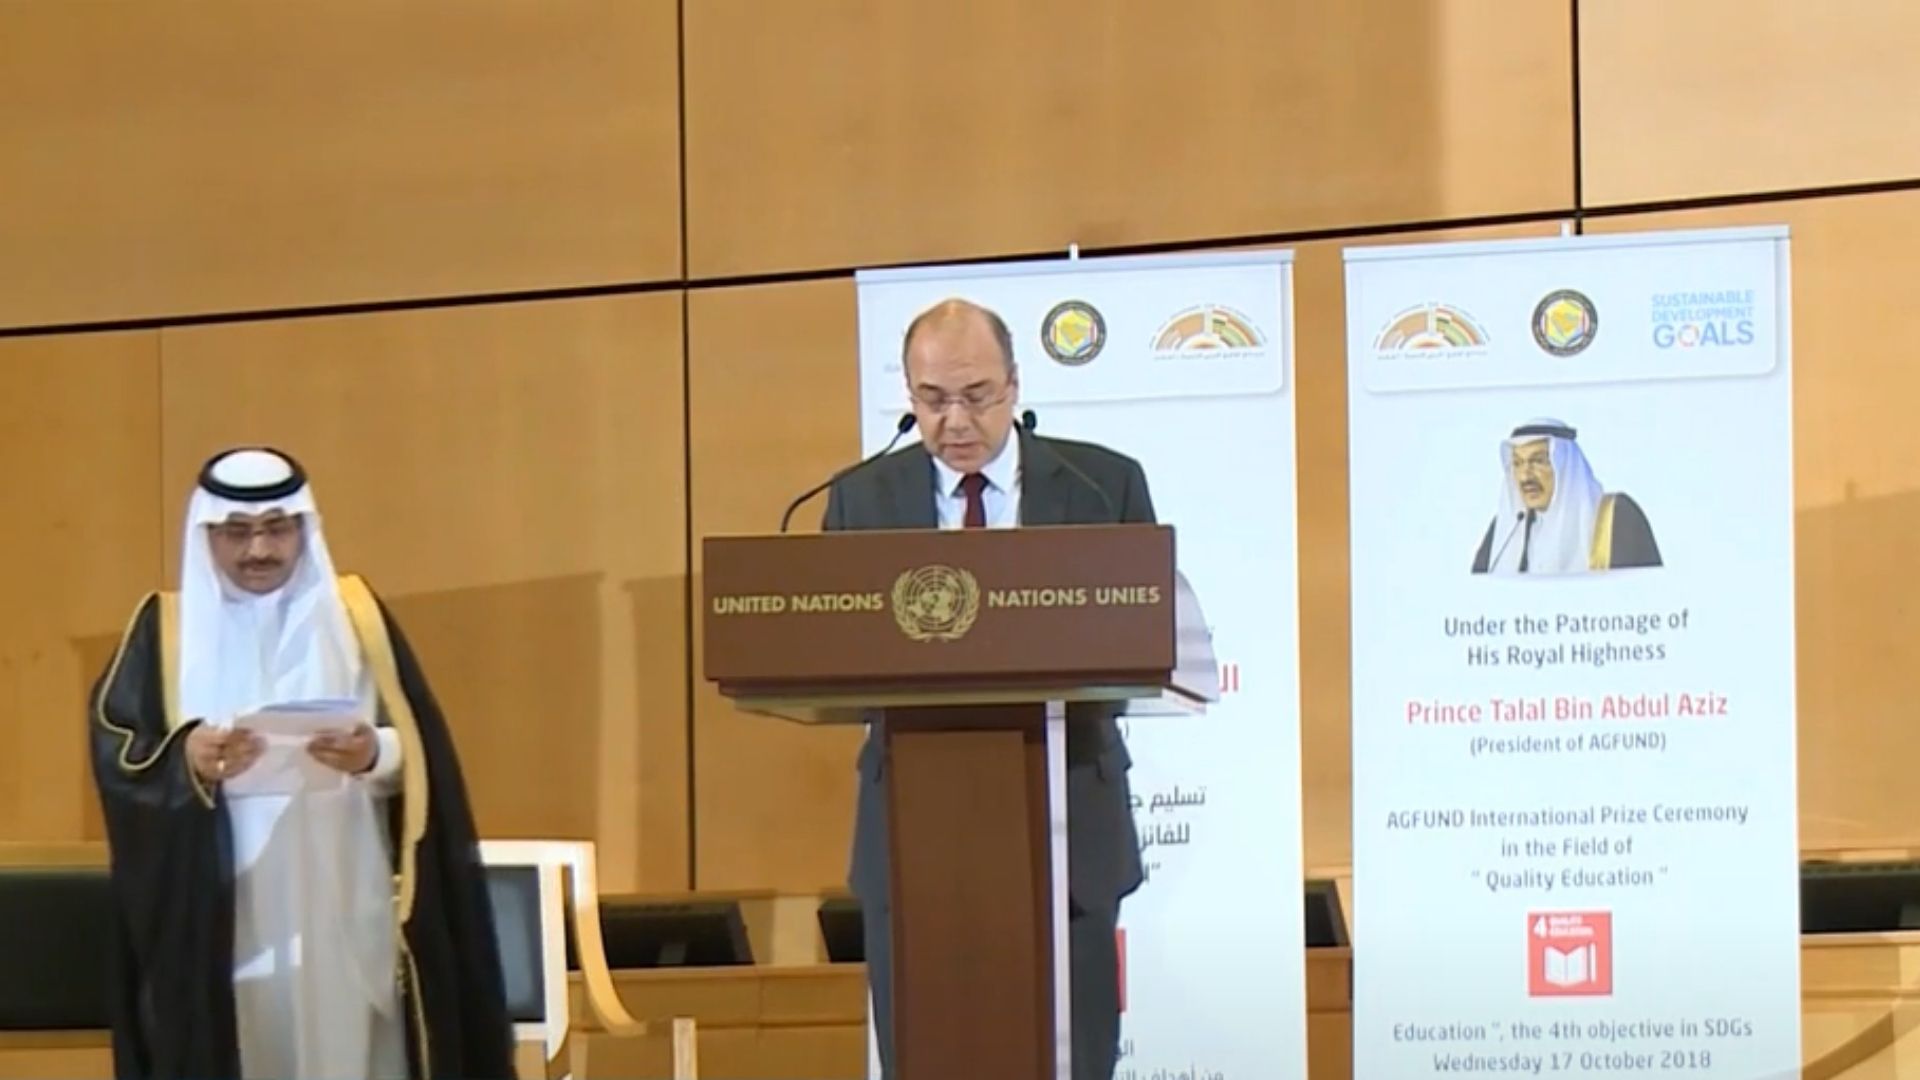 19th Award Ceremony Welcoming Remarks by Mr. Michael Moller, D.G. United Nations Office at Geneva